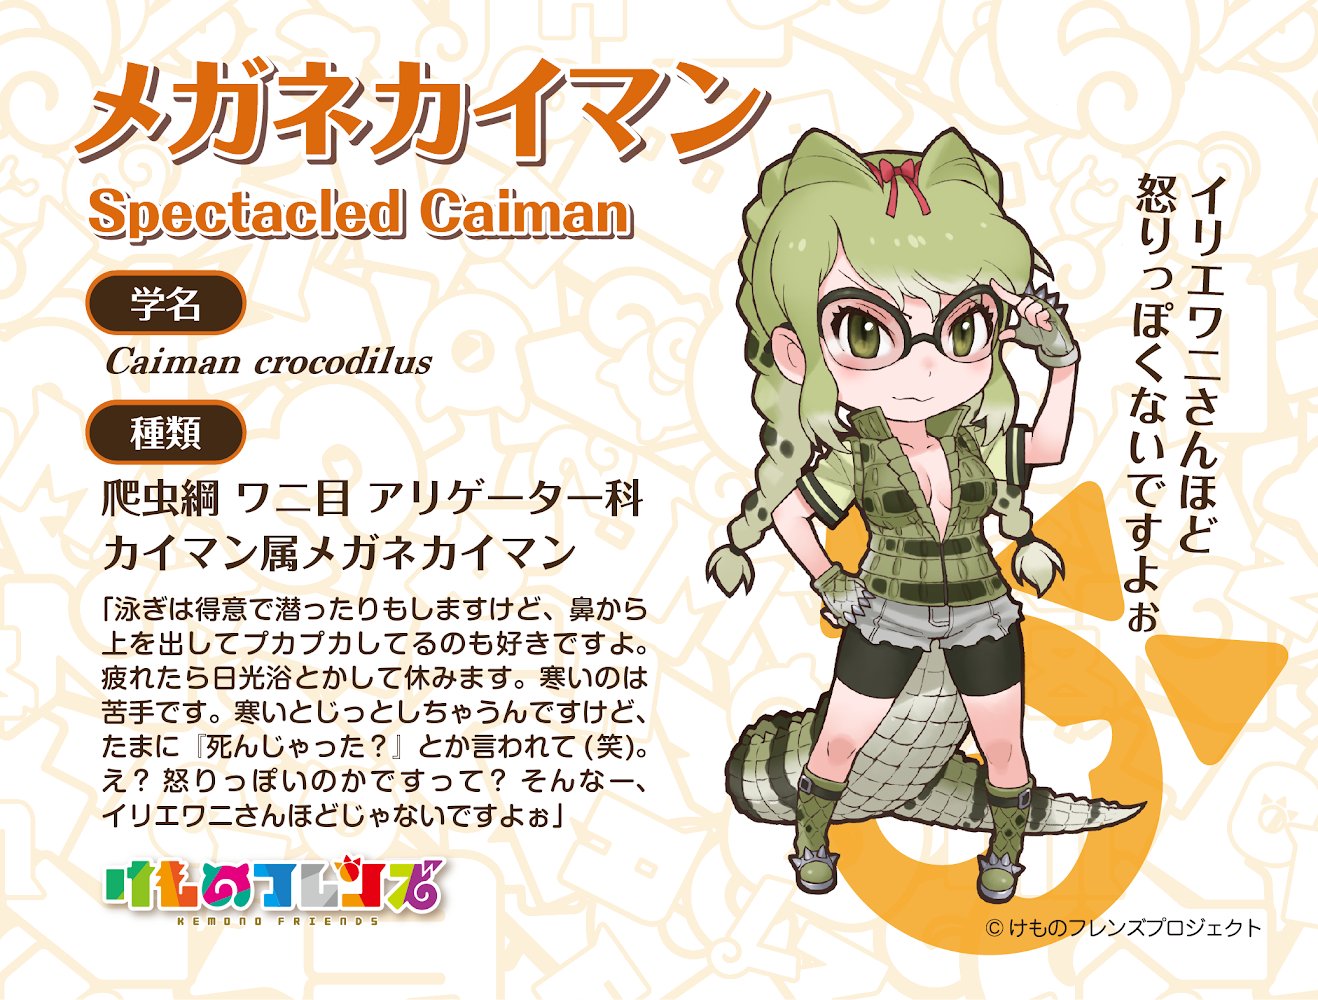 Spectacled Caiman profile posted by Kemono Friends Project Twitter account.